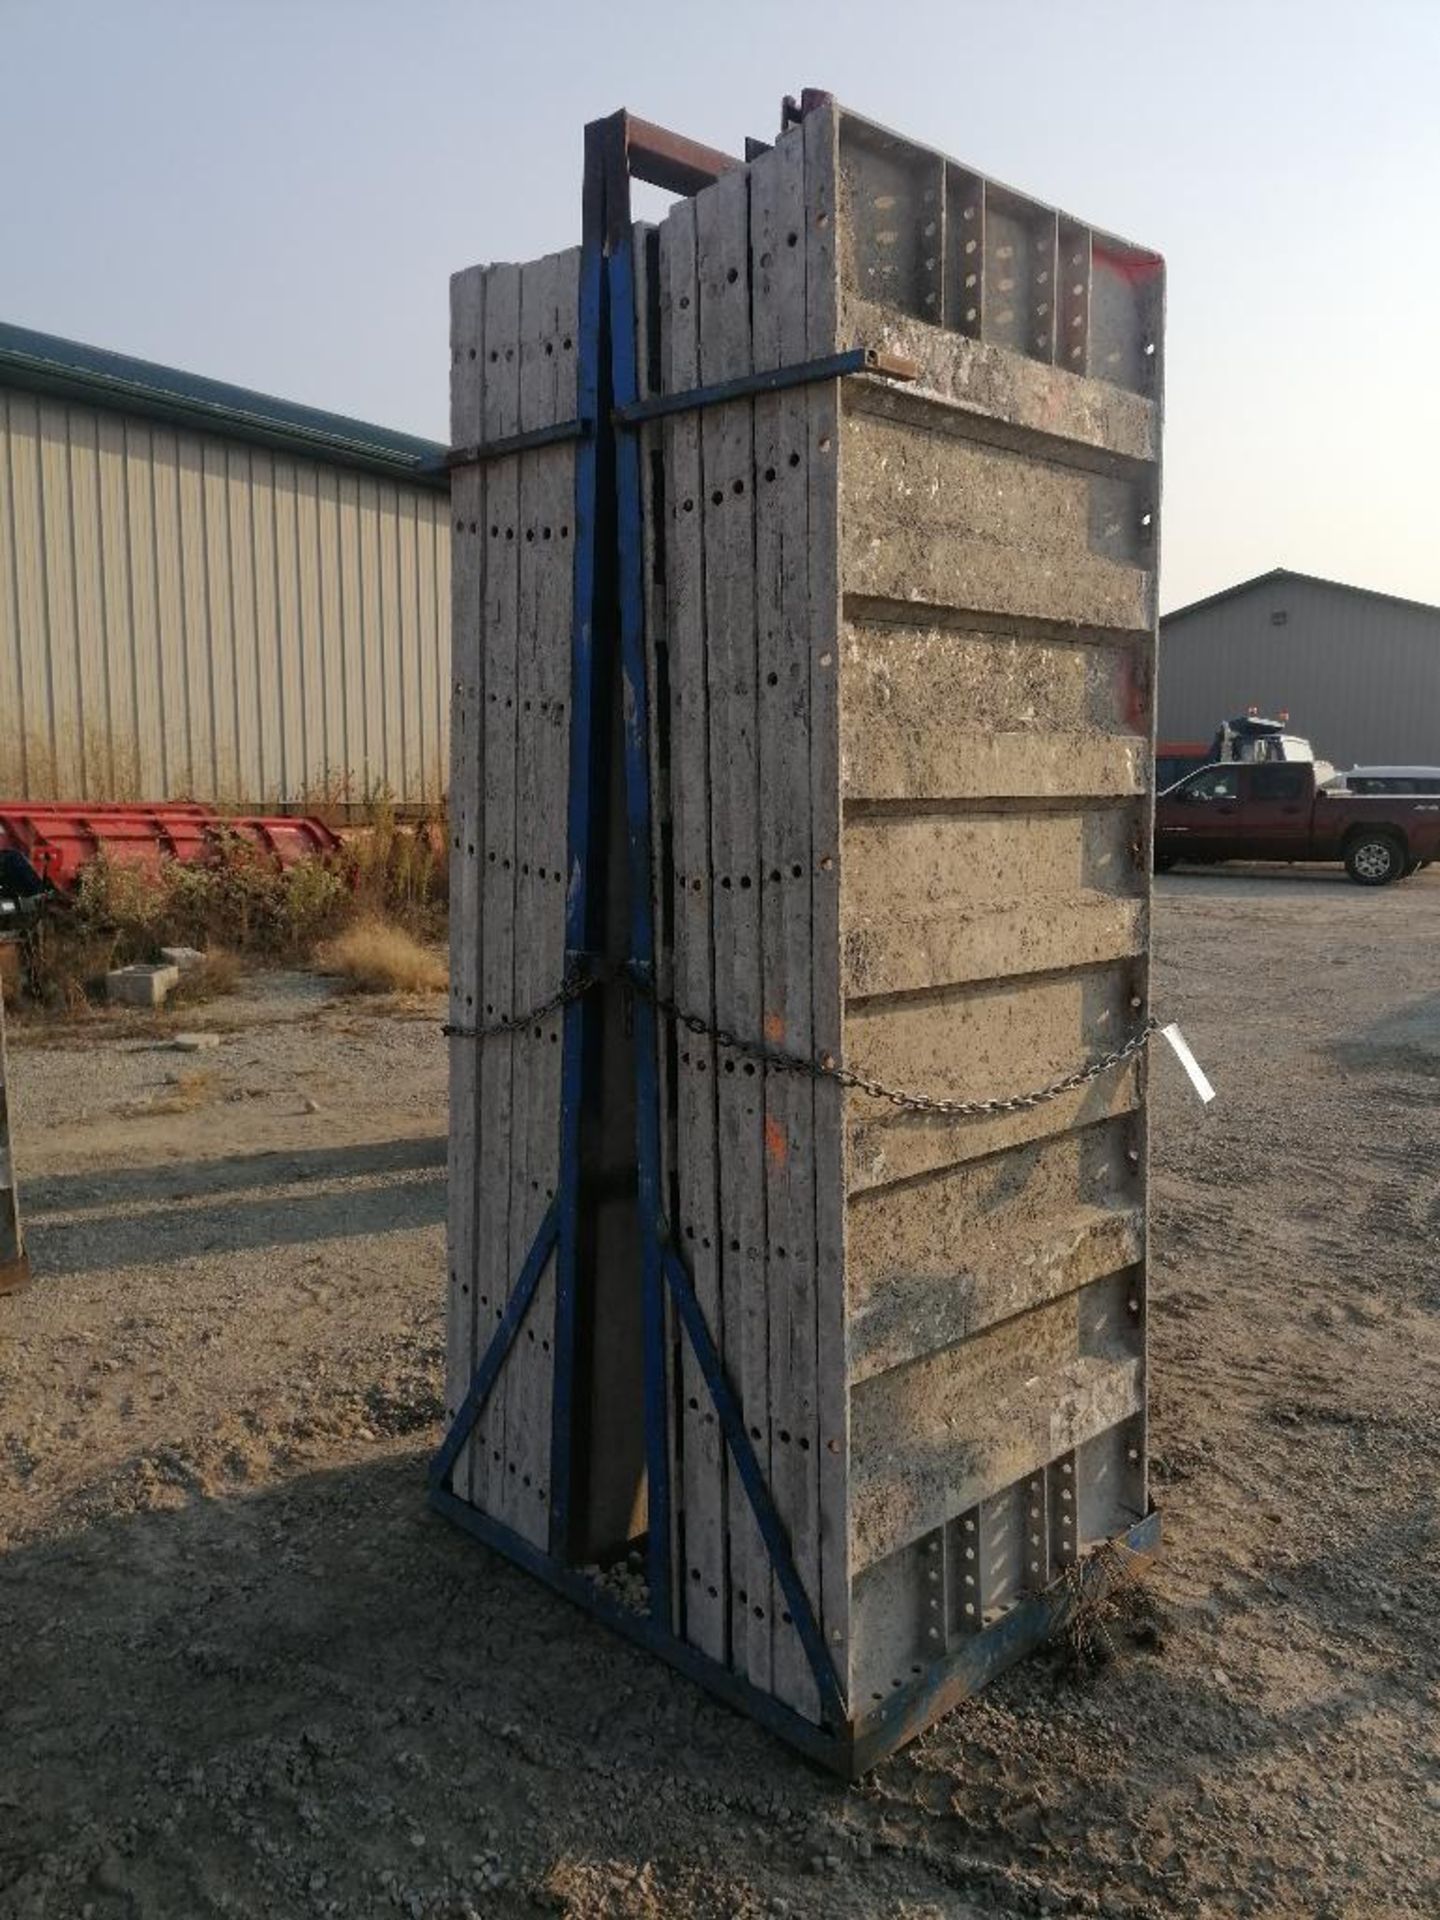 (16) 36" x 8' Smooth Aluminum Concrete Forms 6-12 Hole Pattern, Bell Basket included. Located in - Bild 3 aus 7